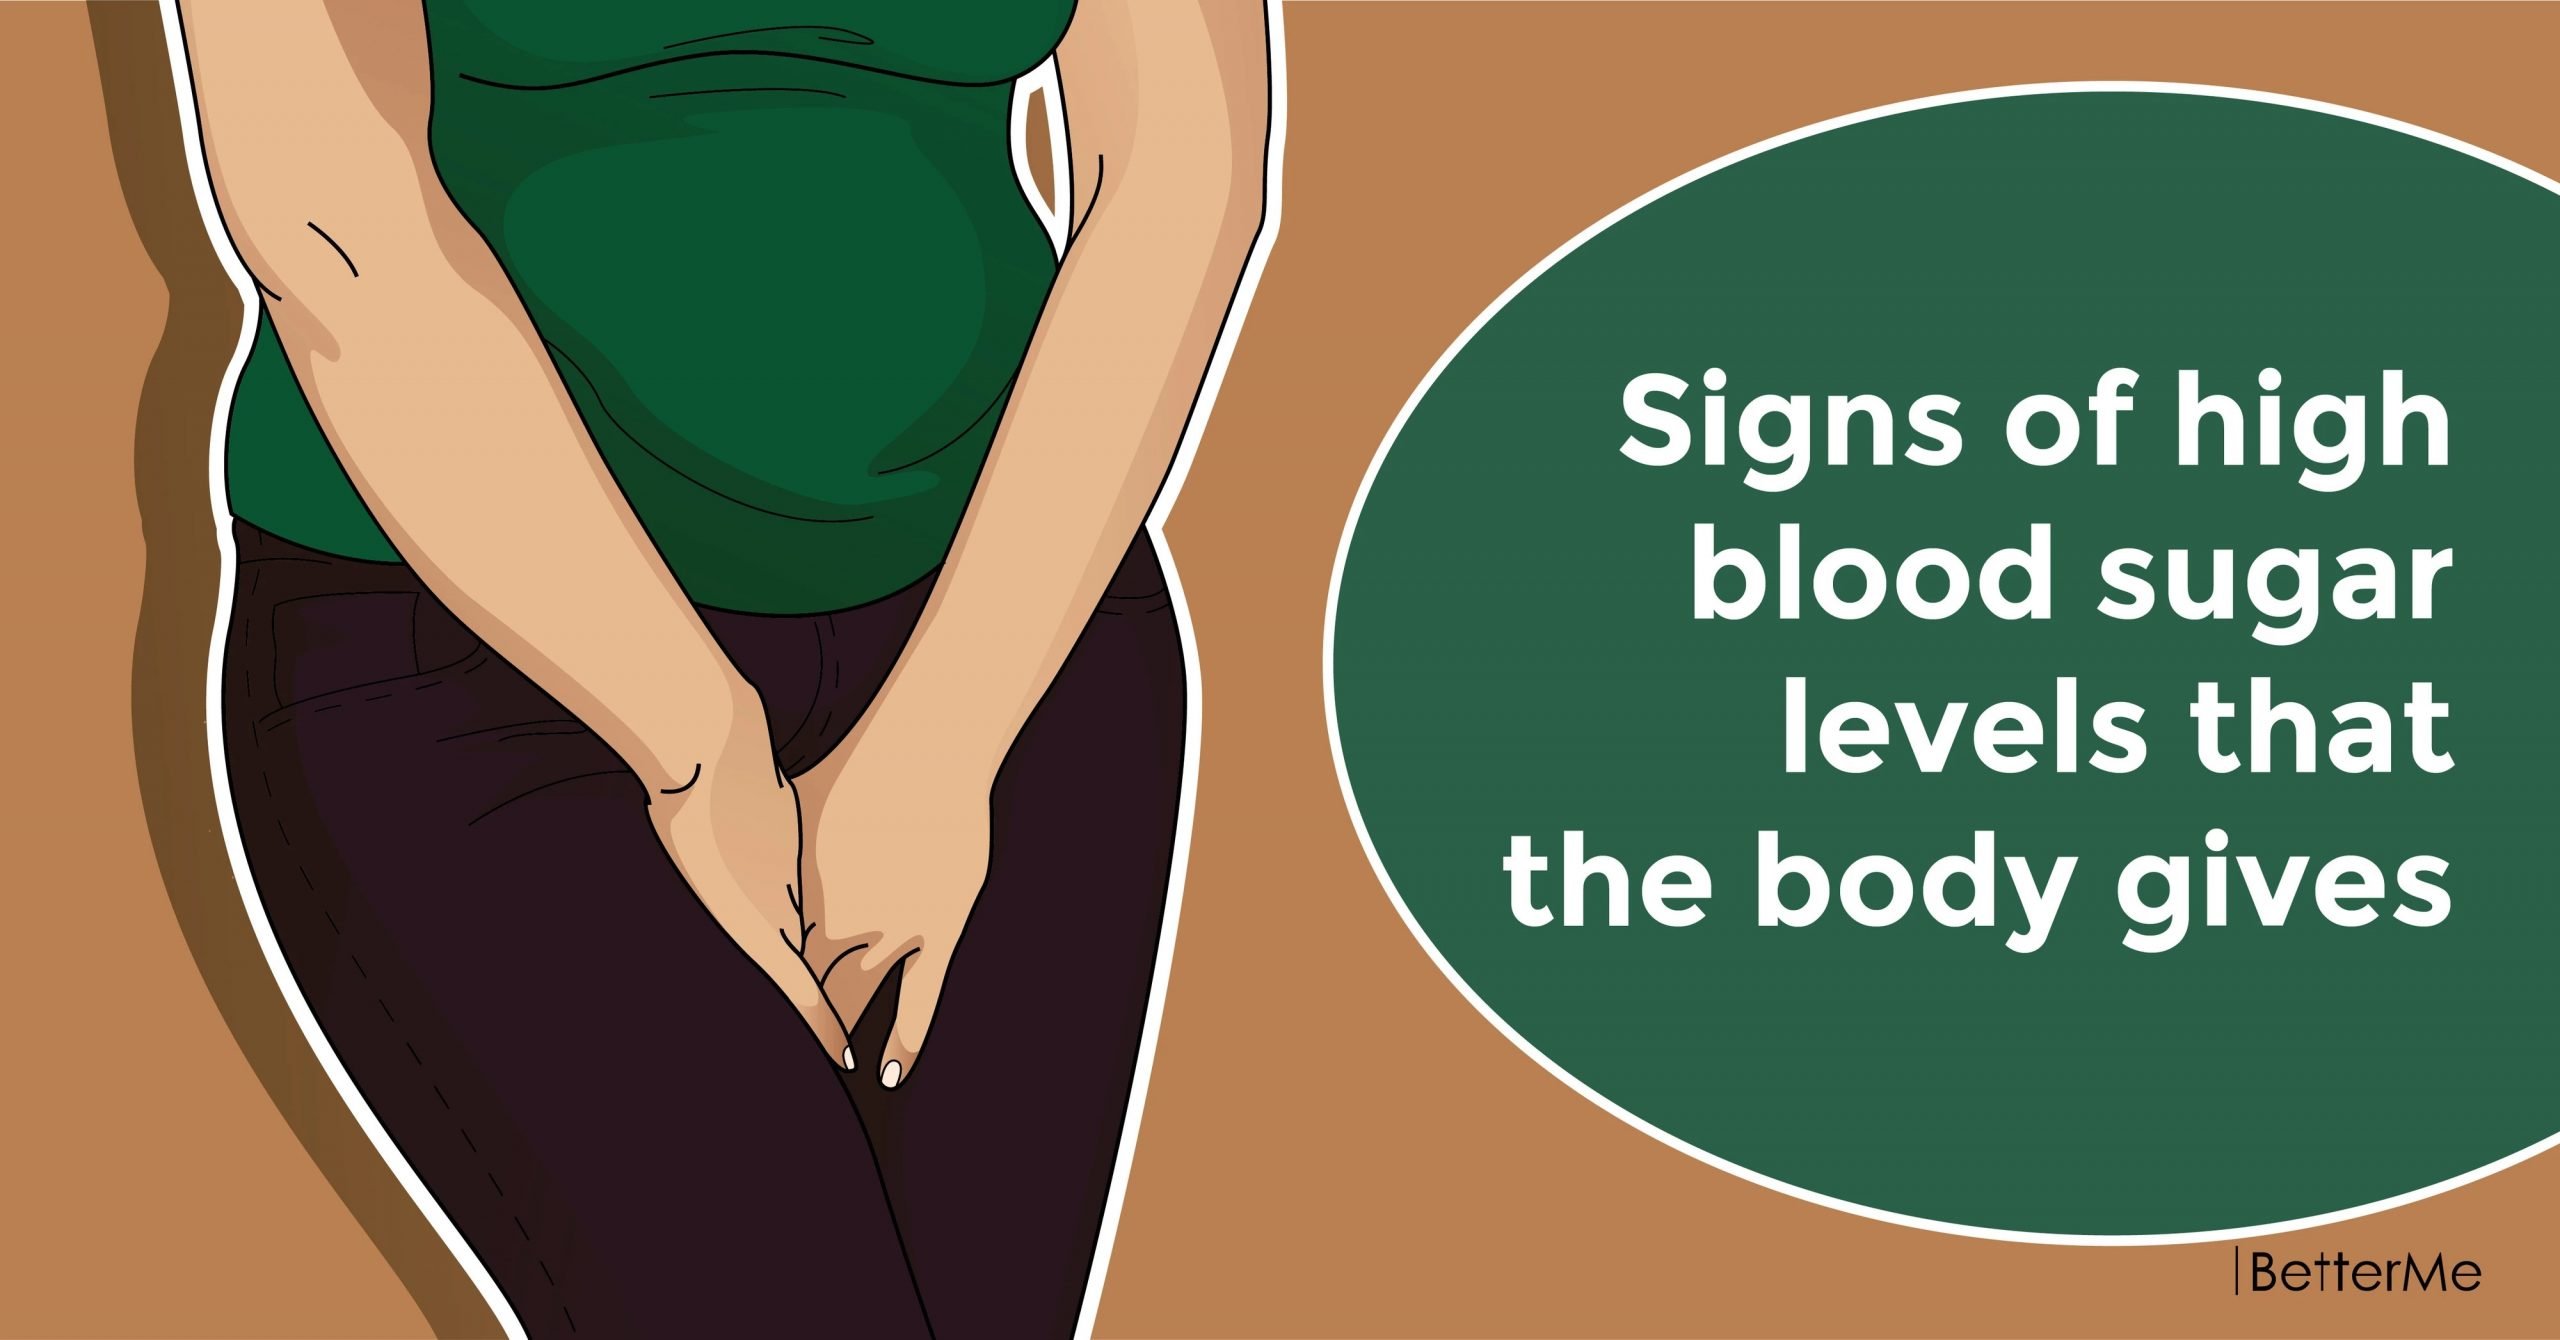 Signs of high blood sugar levels that the body gives